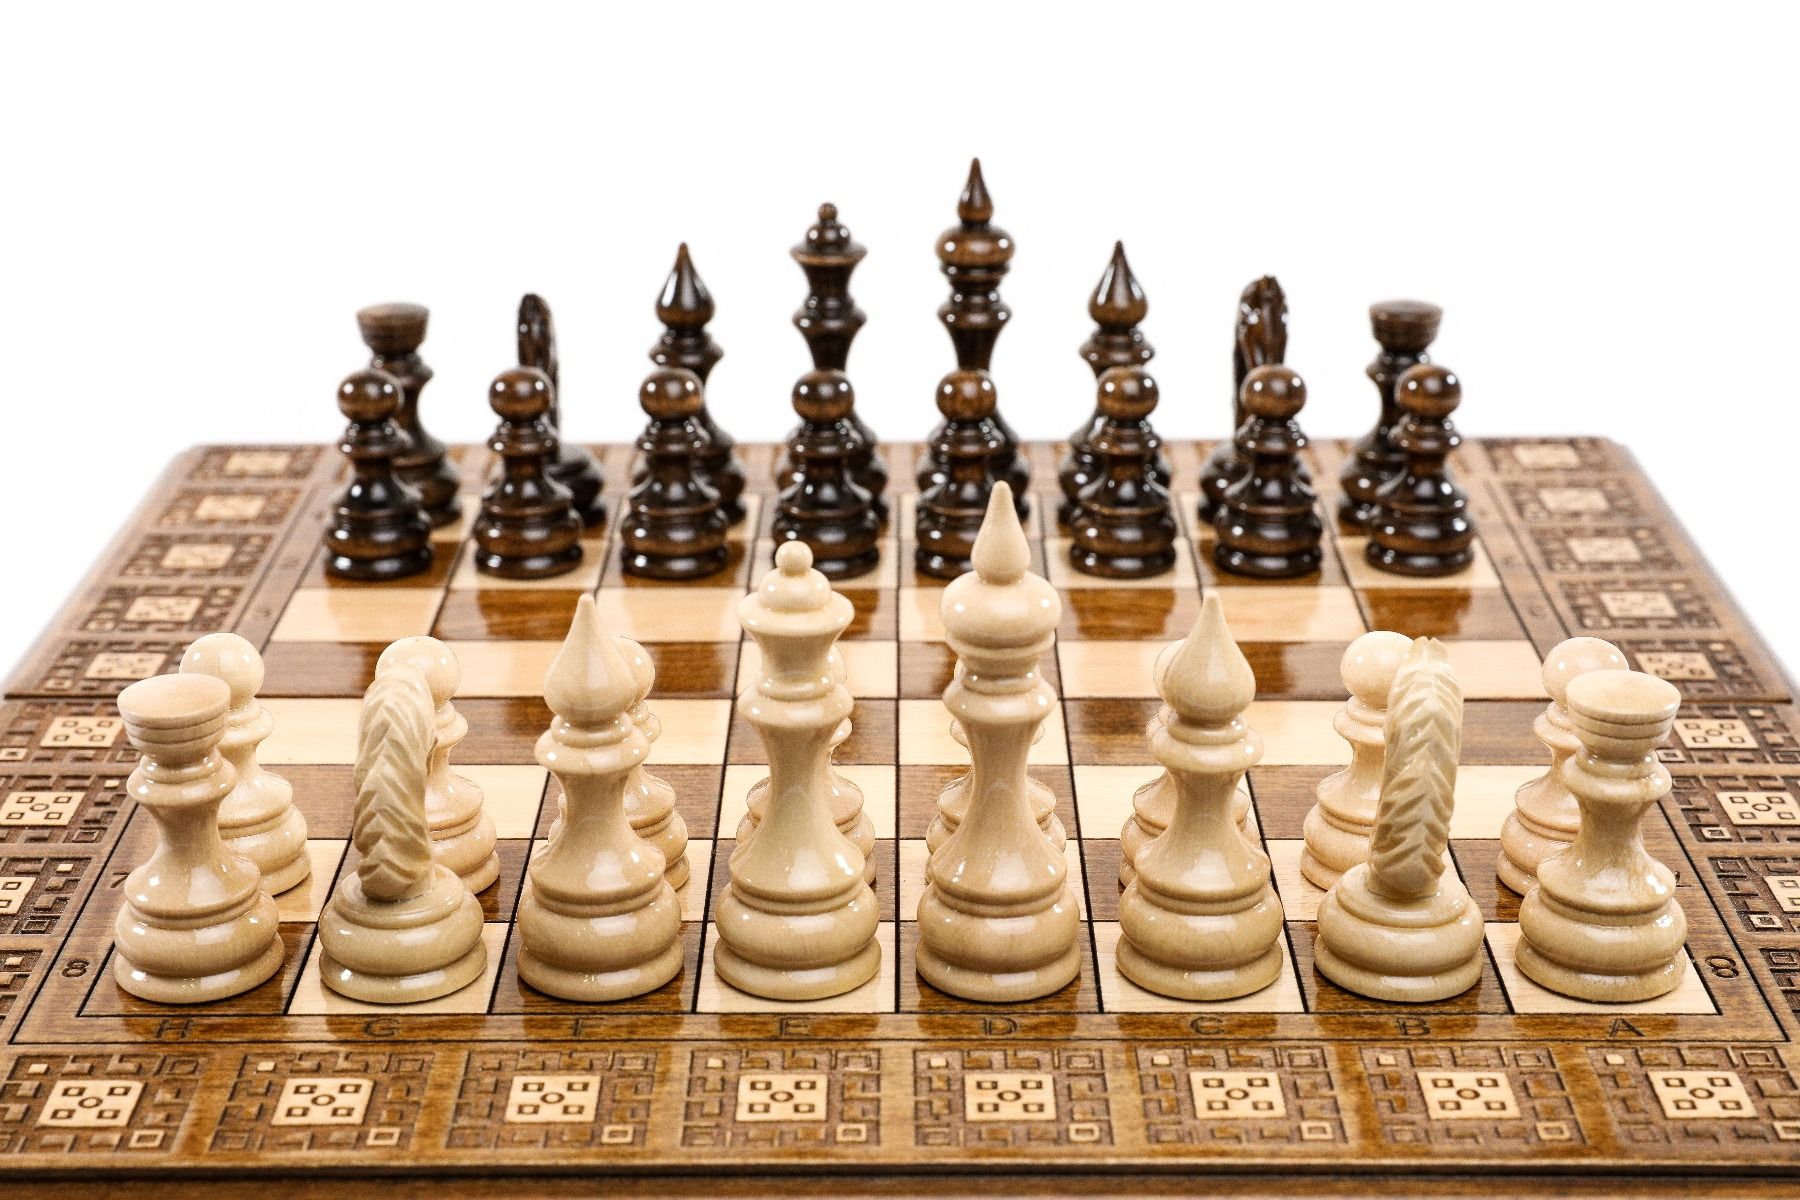 Dive into classic strategy with a unique, artisan-crafted chess set, where detailed carpet patterns provide a stunning visual backdrop.